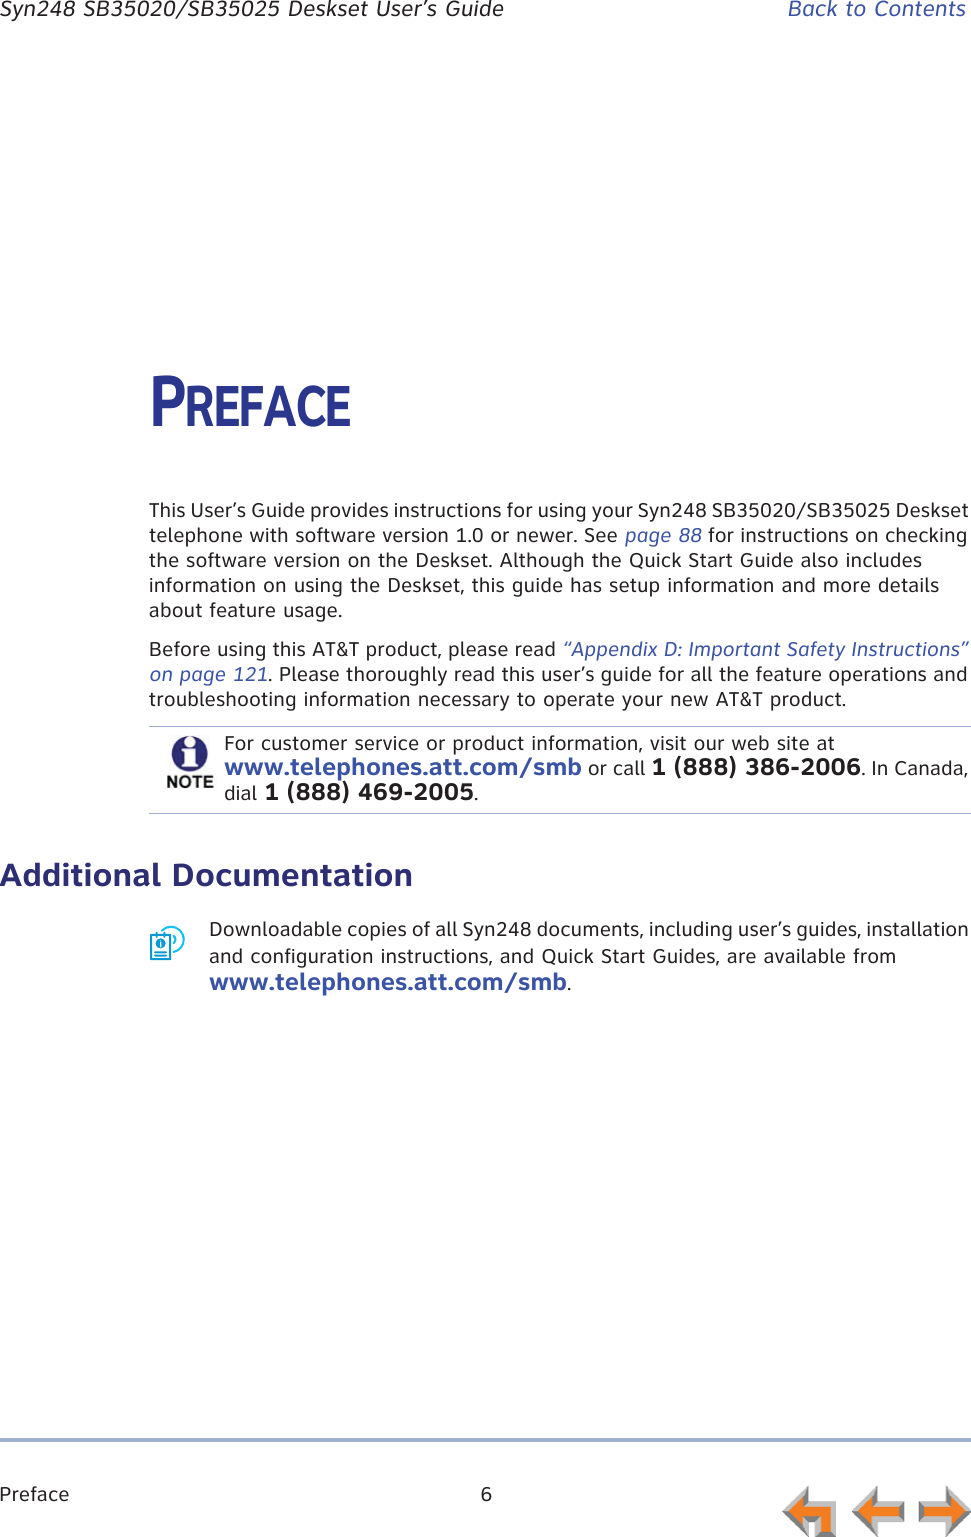 Preface 6      Syn248 SB35020/SB35025 Deskset User’s Guide Back to ContentsPREFACEThis User’s Guide provides instructions for using your Syn248 SB35020/SB35025 Deskset telephone with software version 1.0 or newer. See page 88 for instructions on checking the software version on the Deskset. Although the Quick Start Guide also includes information on using the Deskset, this guide has setup information and more details about feature usage.Before using this AT&amp;T product, please read “Appendix D: Important Safety Instructions” on page 121. Please thoroughly read this user’s guide for all the feature operations and troubleshooting information necessary to operate your new AT&amp;T product.Additional DocumentationDownloadable copies of all Syn248 documents, including user’s guides, installation and configuration instructions, and Quick Start Guides, are available from www.telephones.att.com/smb.For customer service or product information, visit our web site at www.telephones.att.com/smb or call 1 (888) 386-2006. In Canada, dial 1 (888) 469-2005.